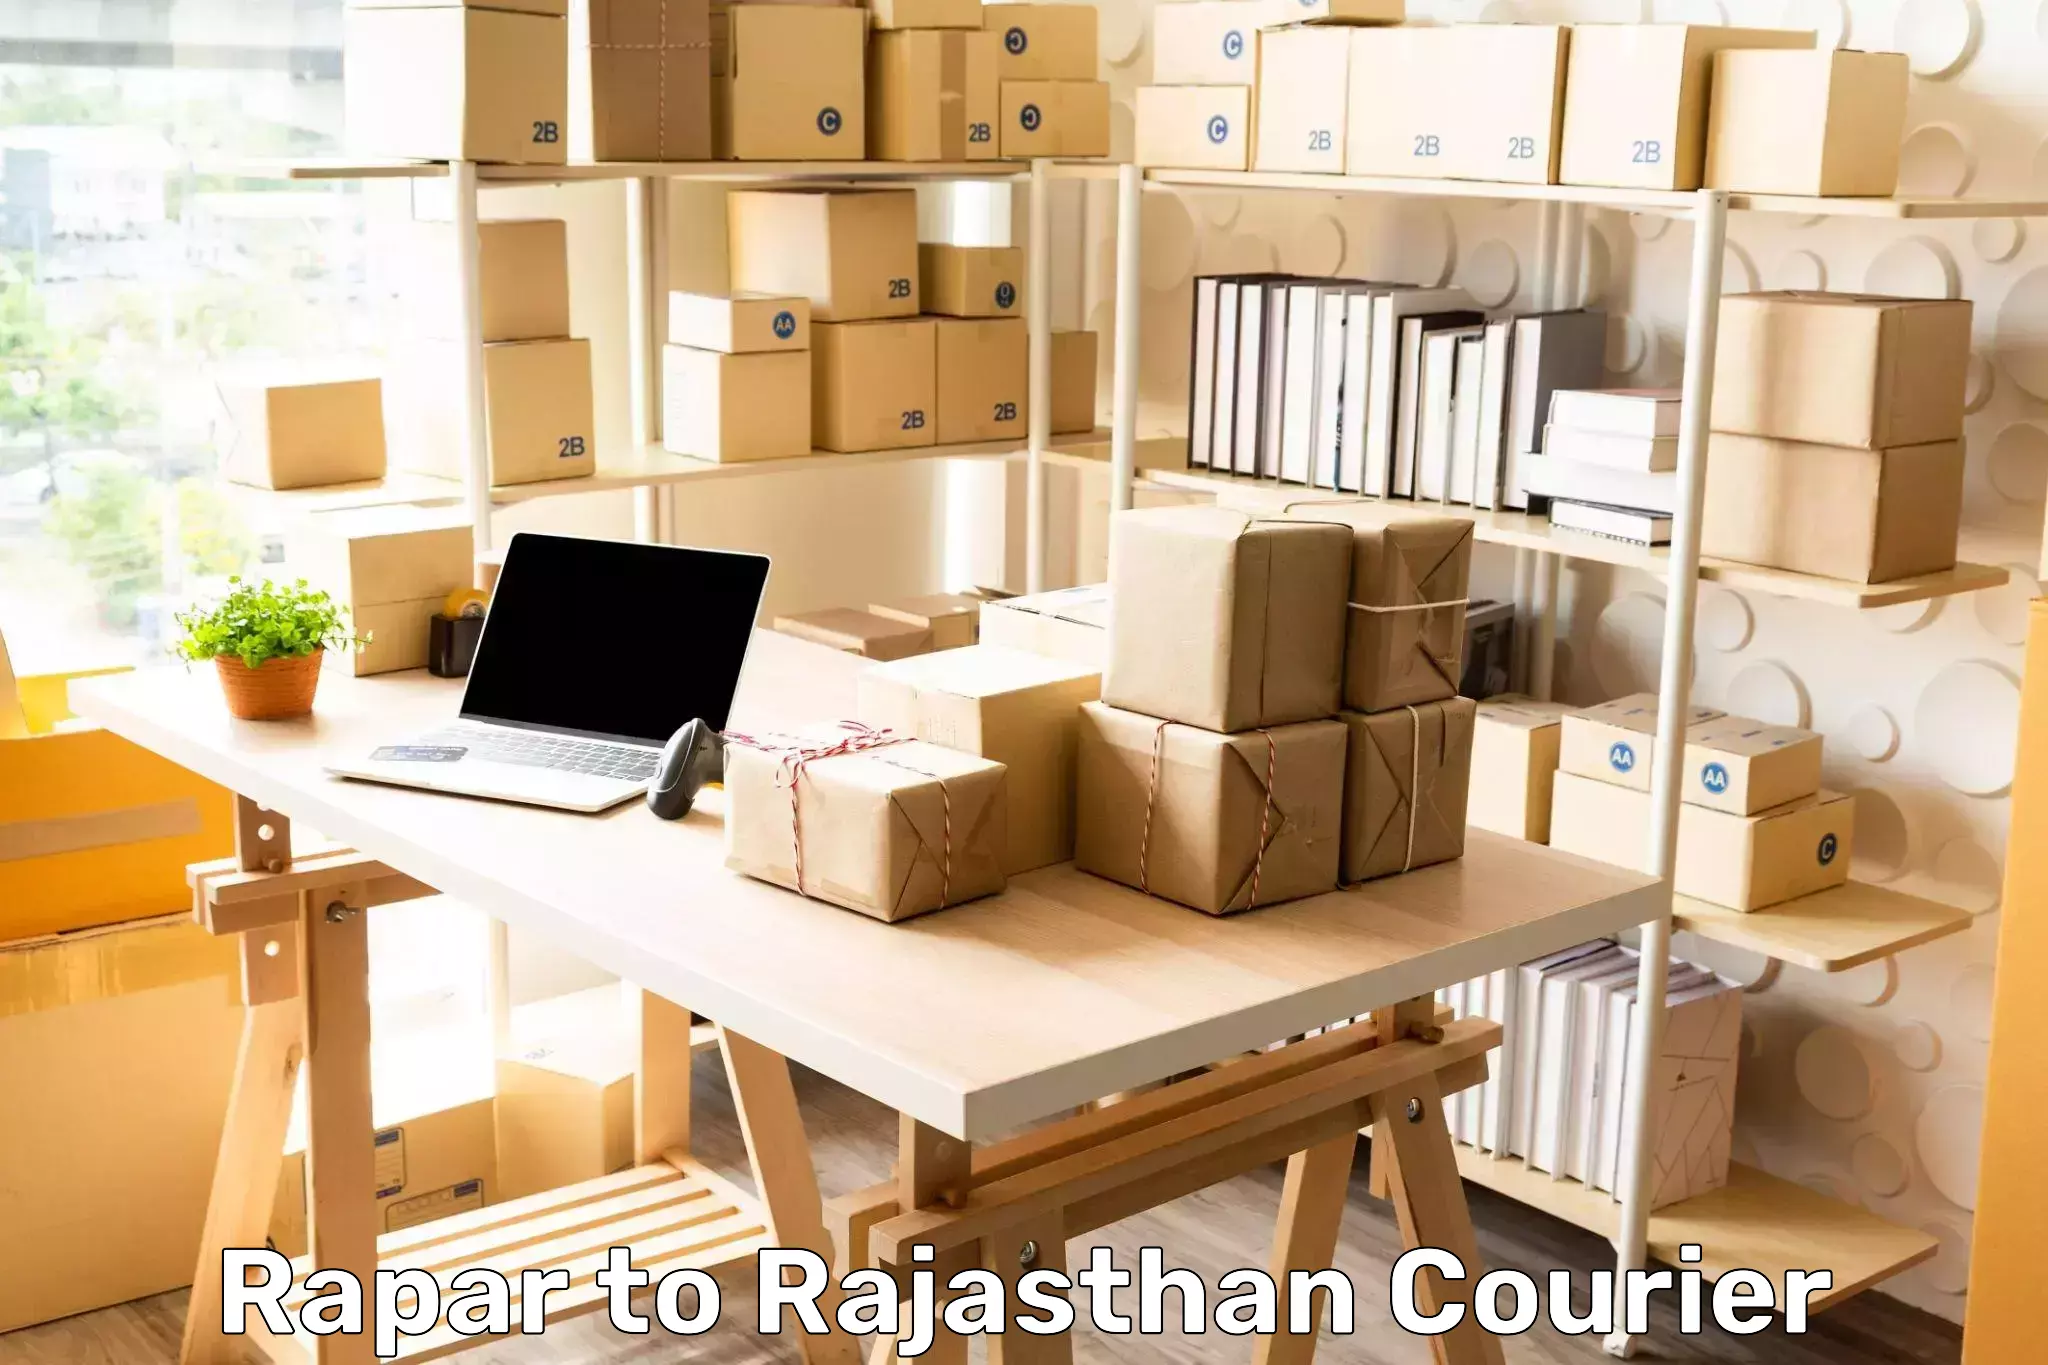 Package consolidation in Rapar to Rajsamand